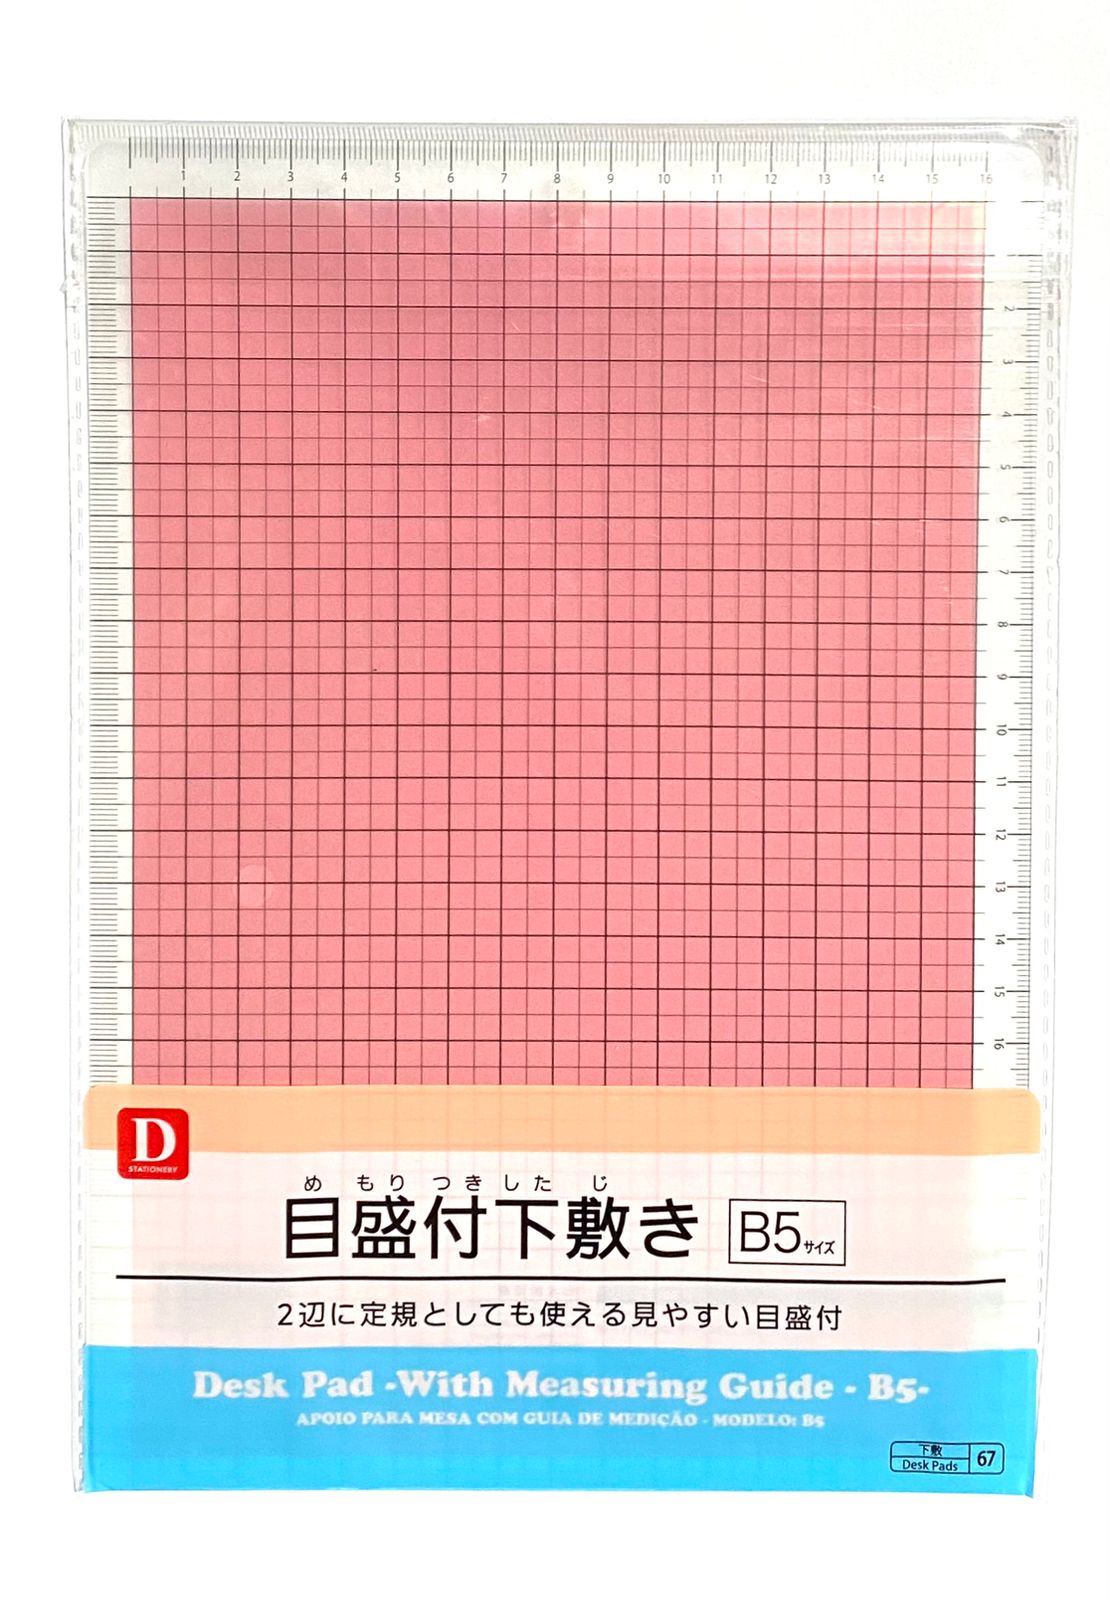 Daiso Desk Pad With Measuring Guide B5 Size